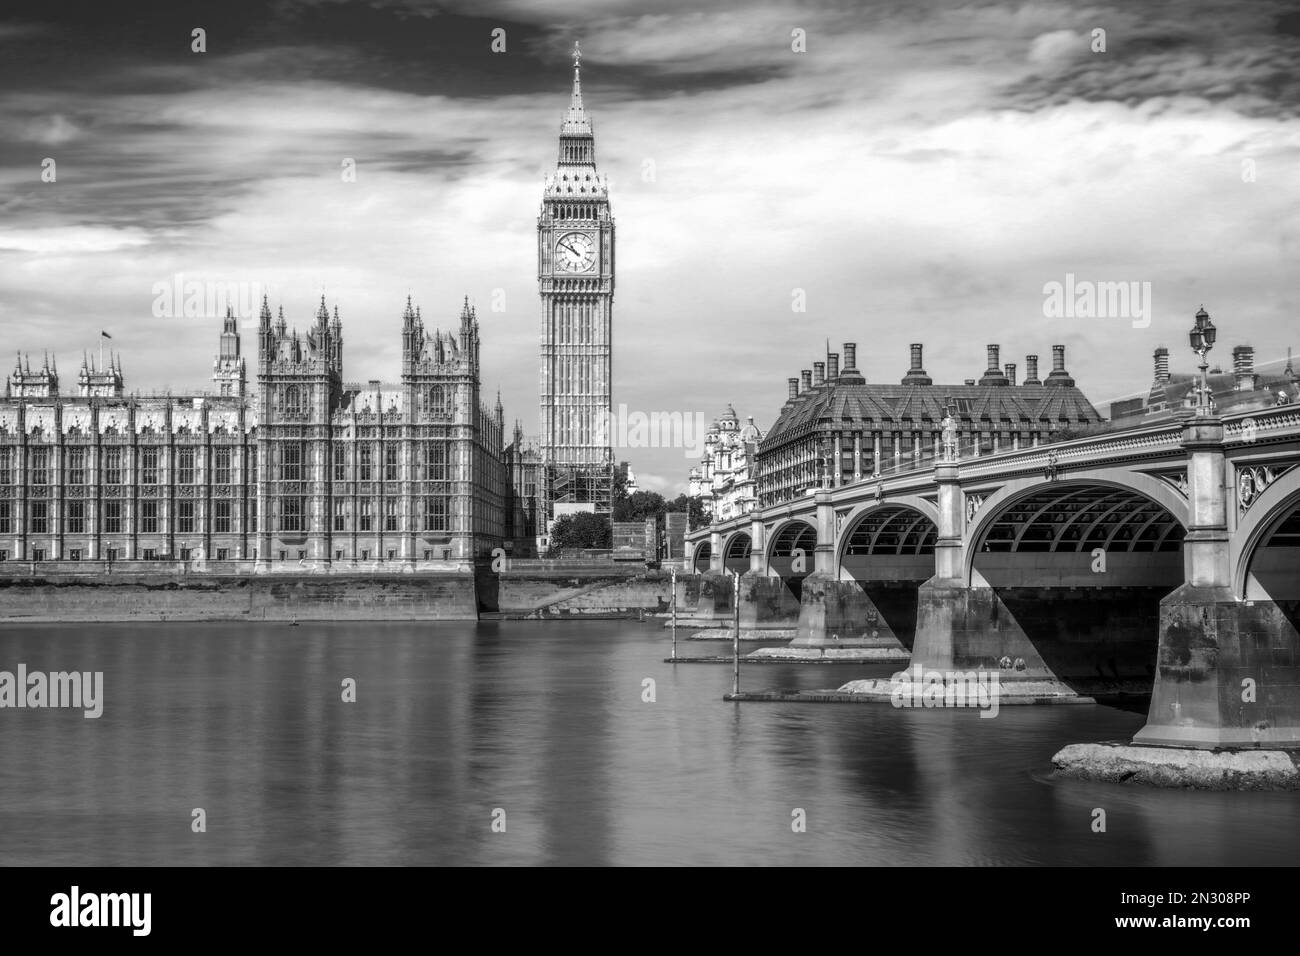 Westminster bridge and Big Ben in London, UK. Long exposure black and white photography with motion blur. Stock Photo